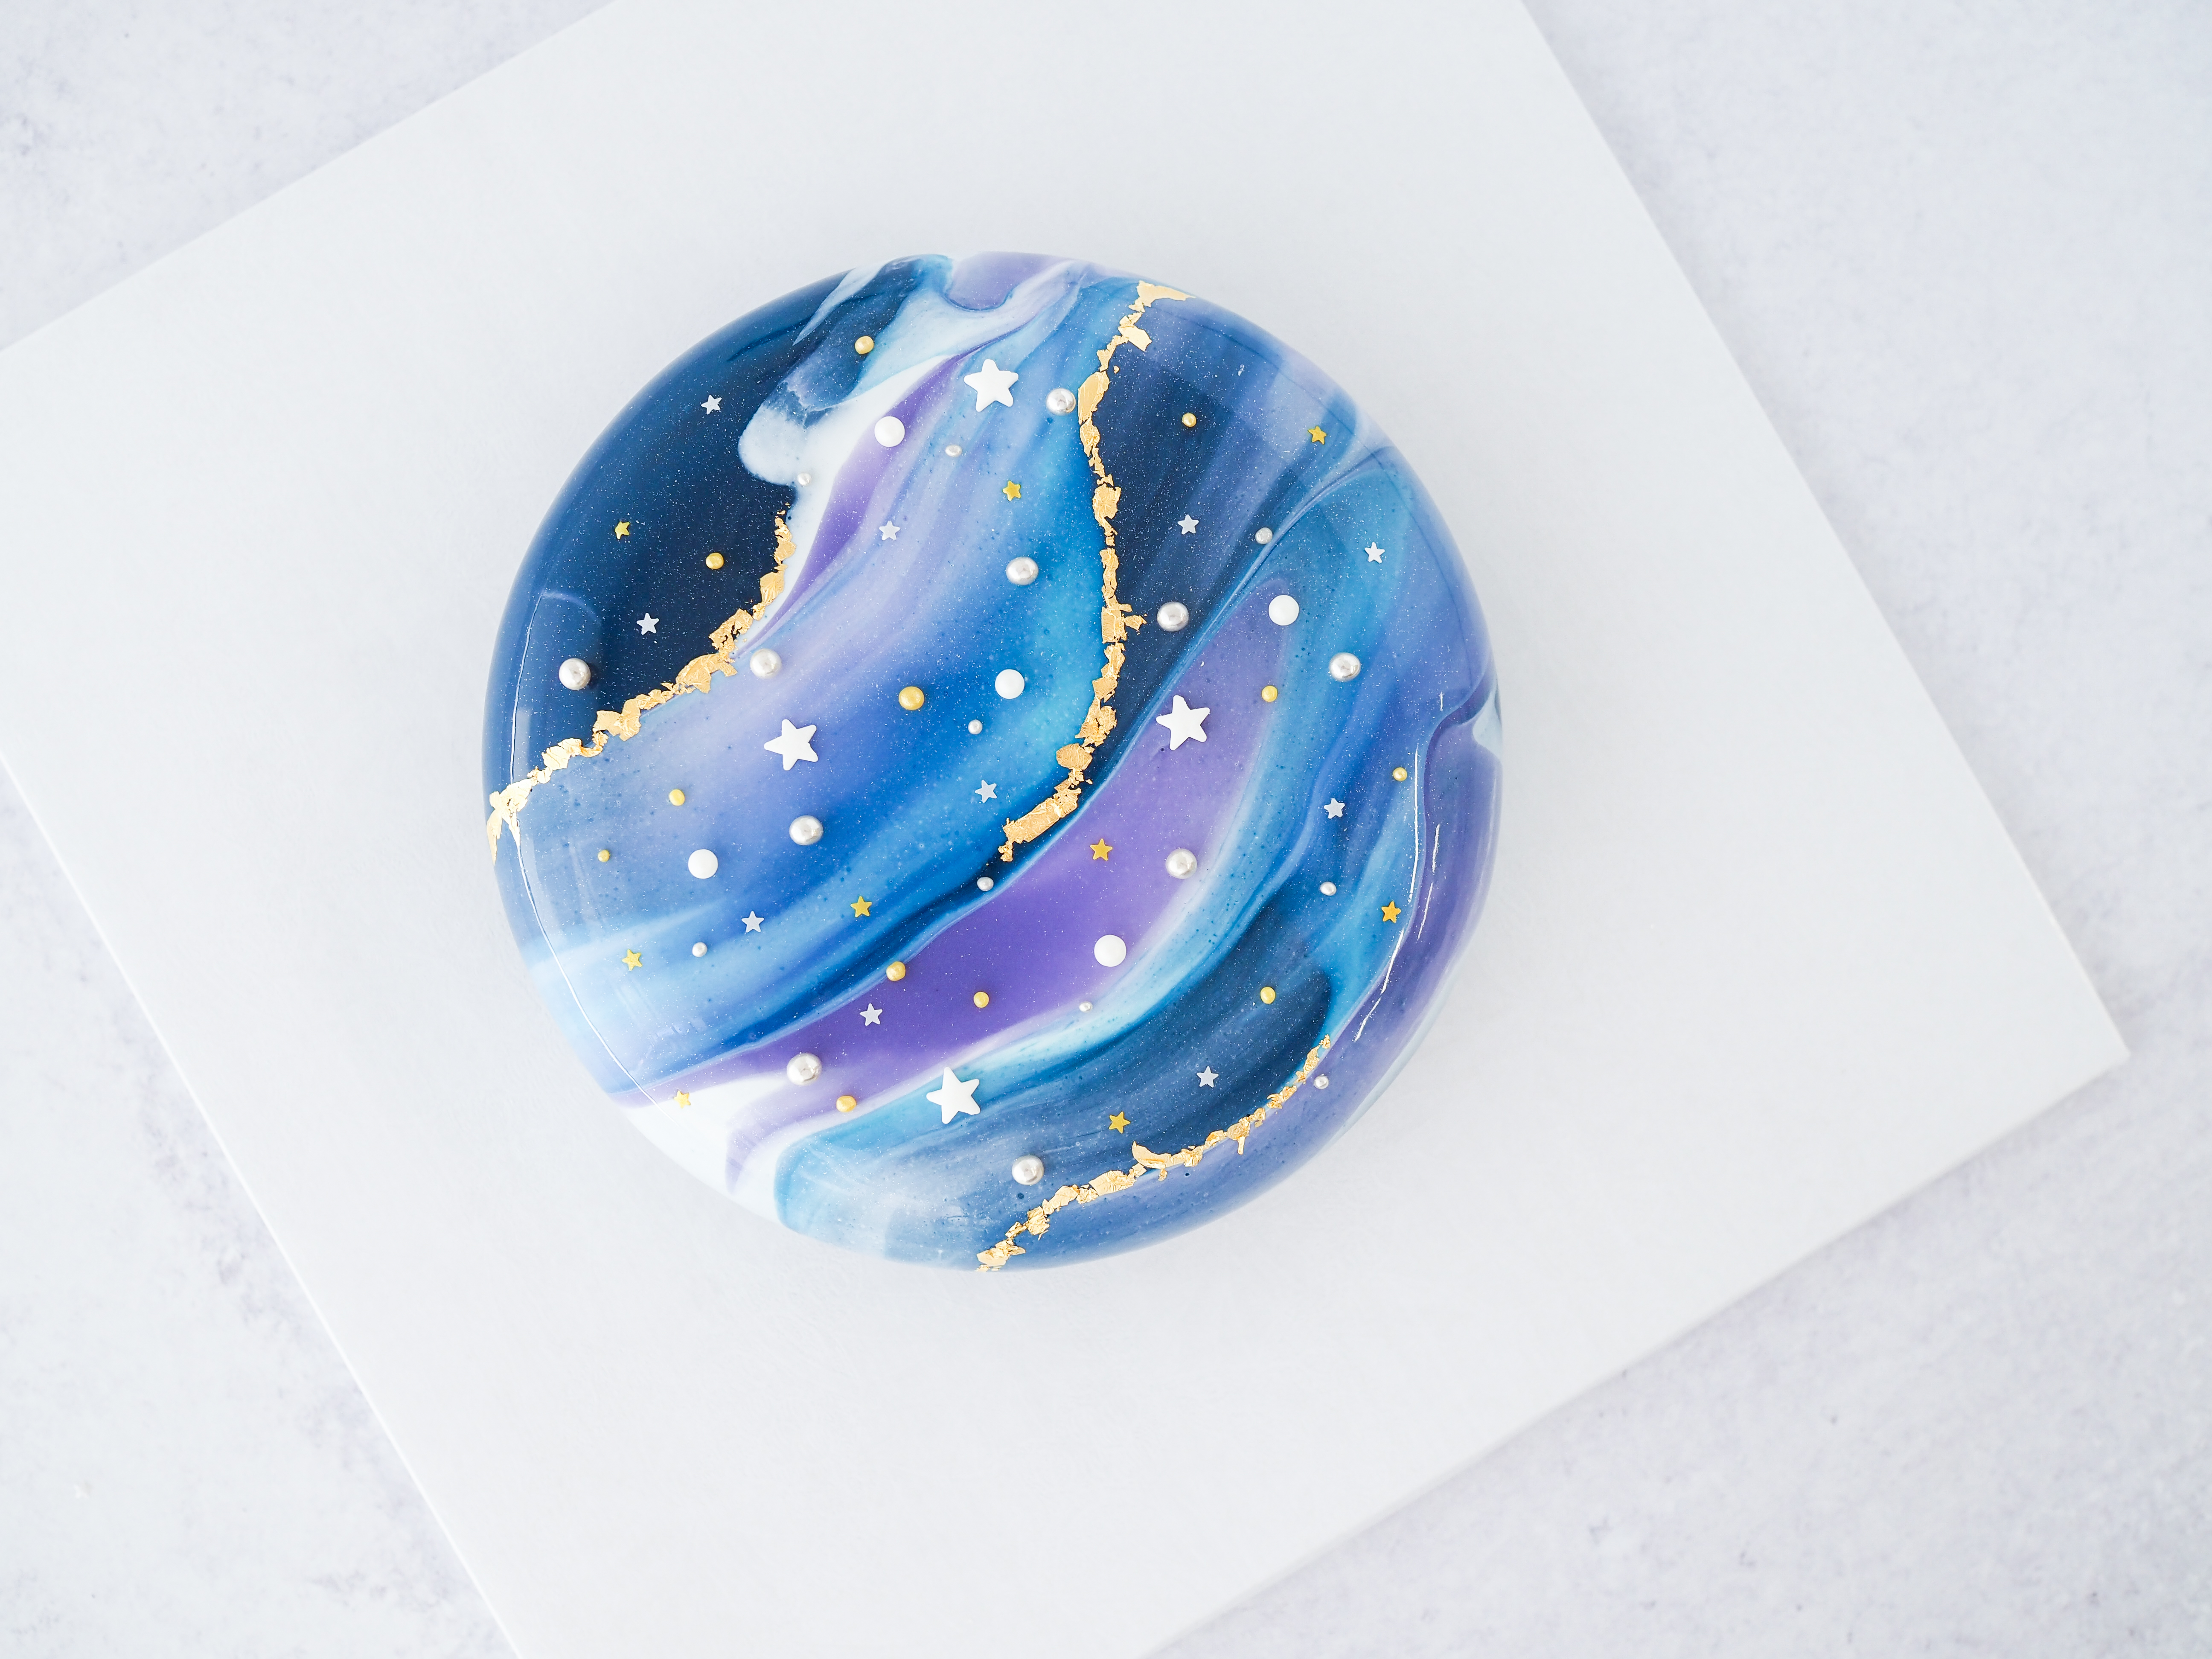 A galaxy-like circular cake glazed with swirls of purple and blues, and showered with star candies.